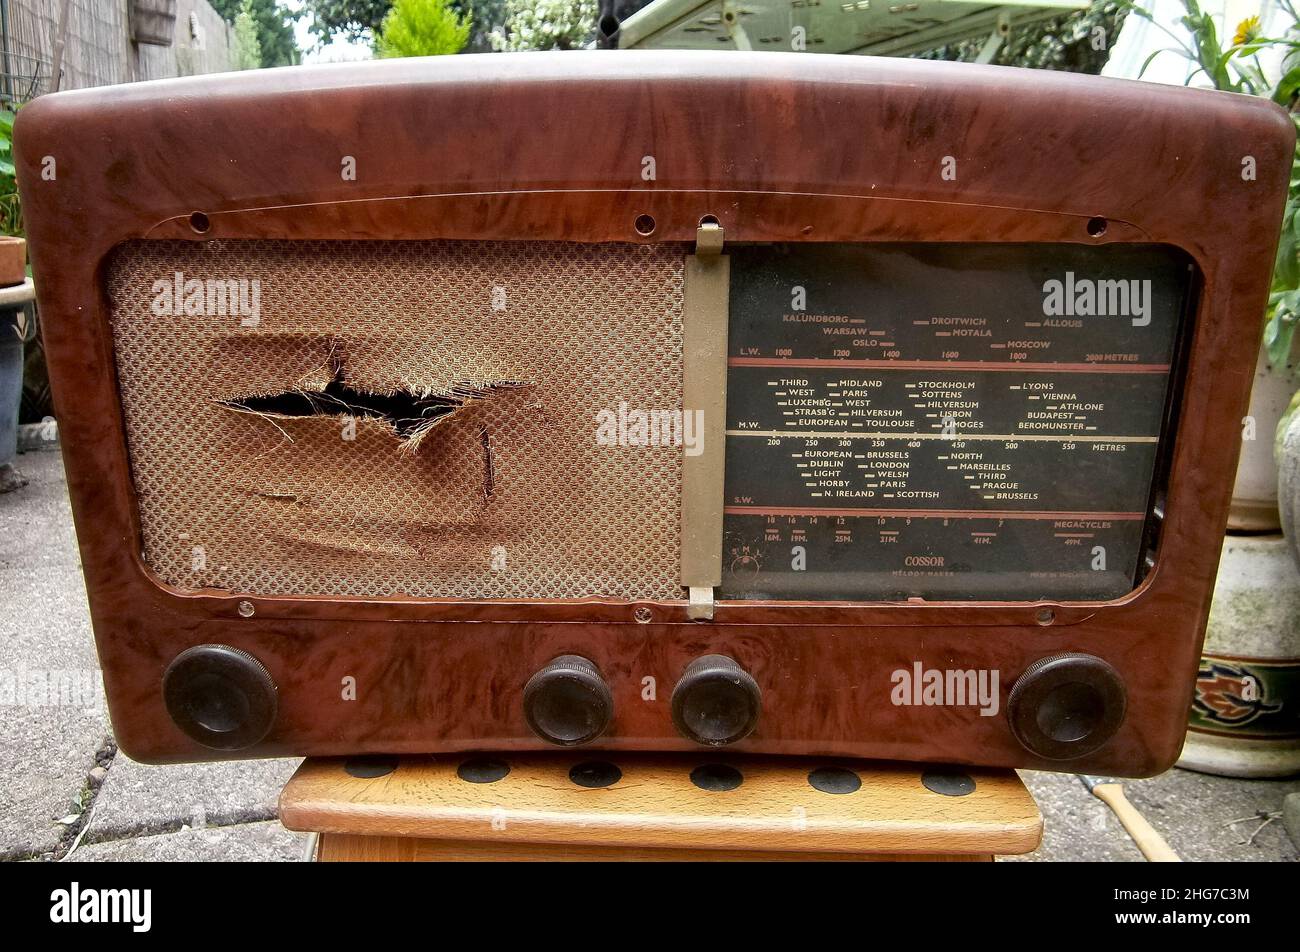 1949 COSSOR melody maker radio with damaged speaker grille Stock Photo